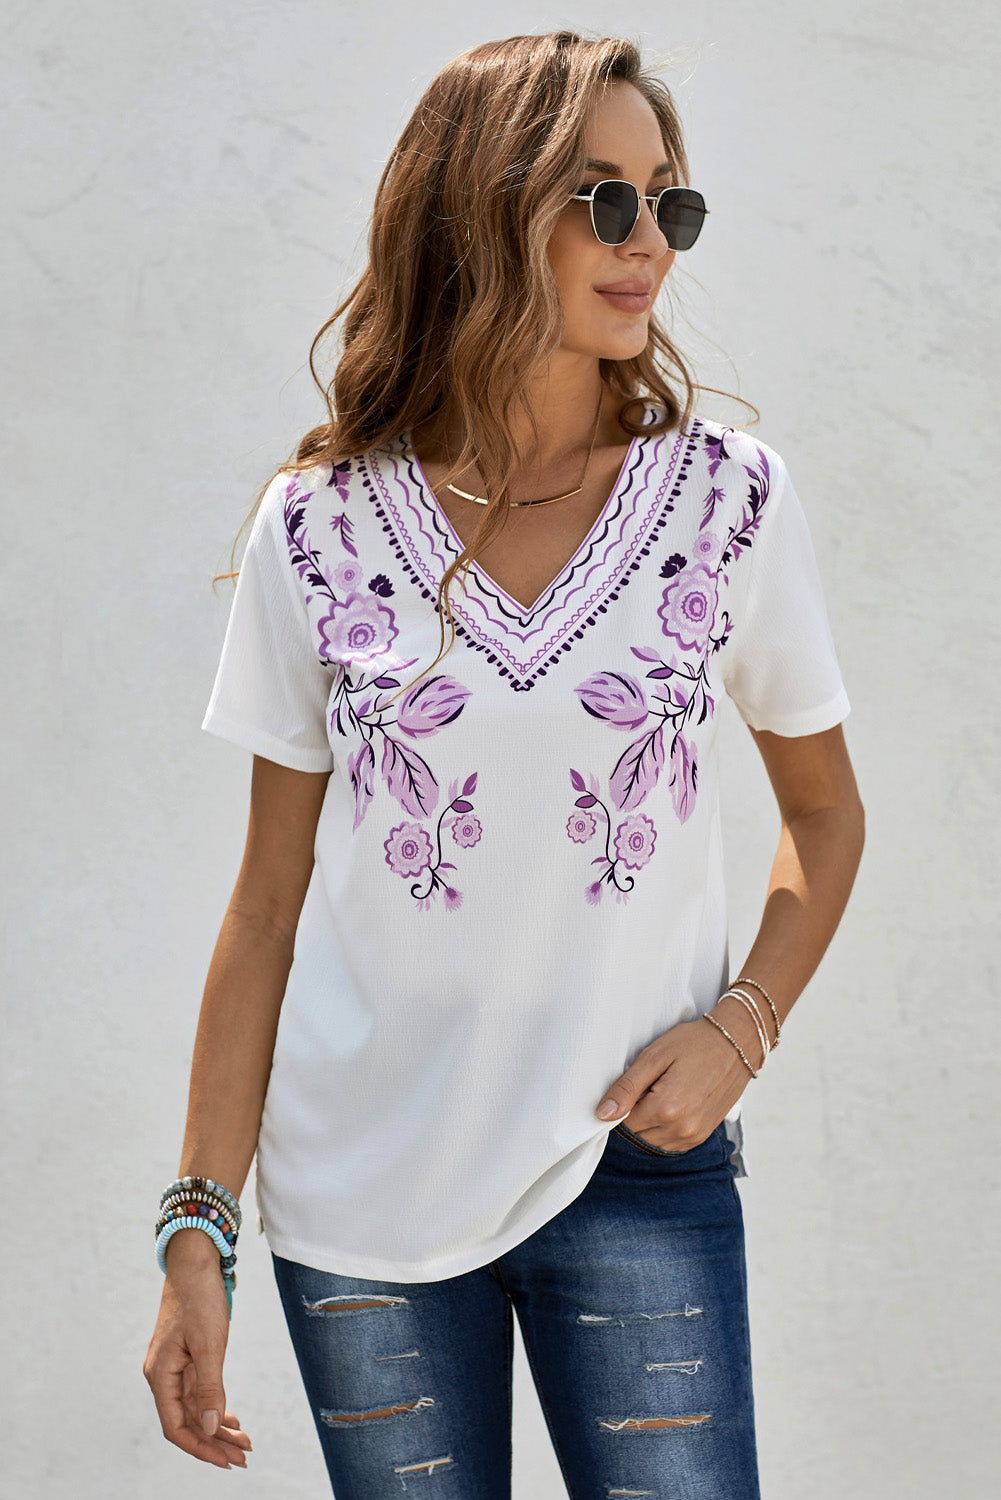 Women's V Neck White Shirt With Embroidered Flowers